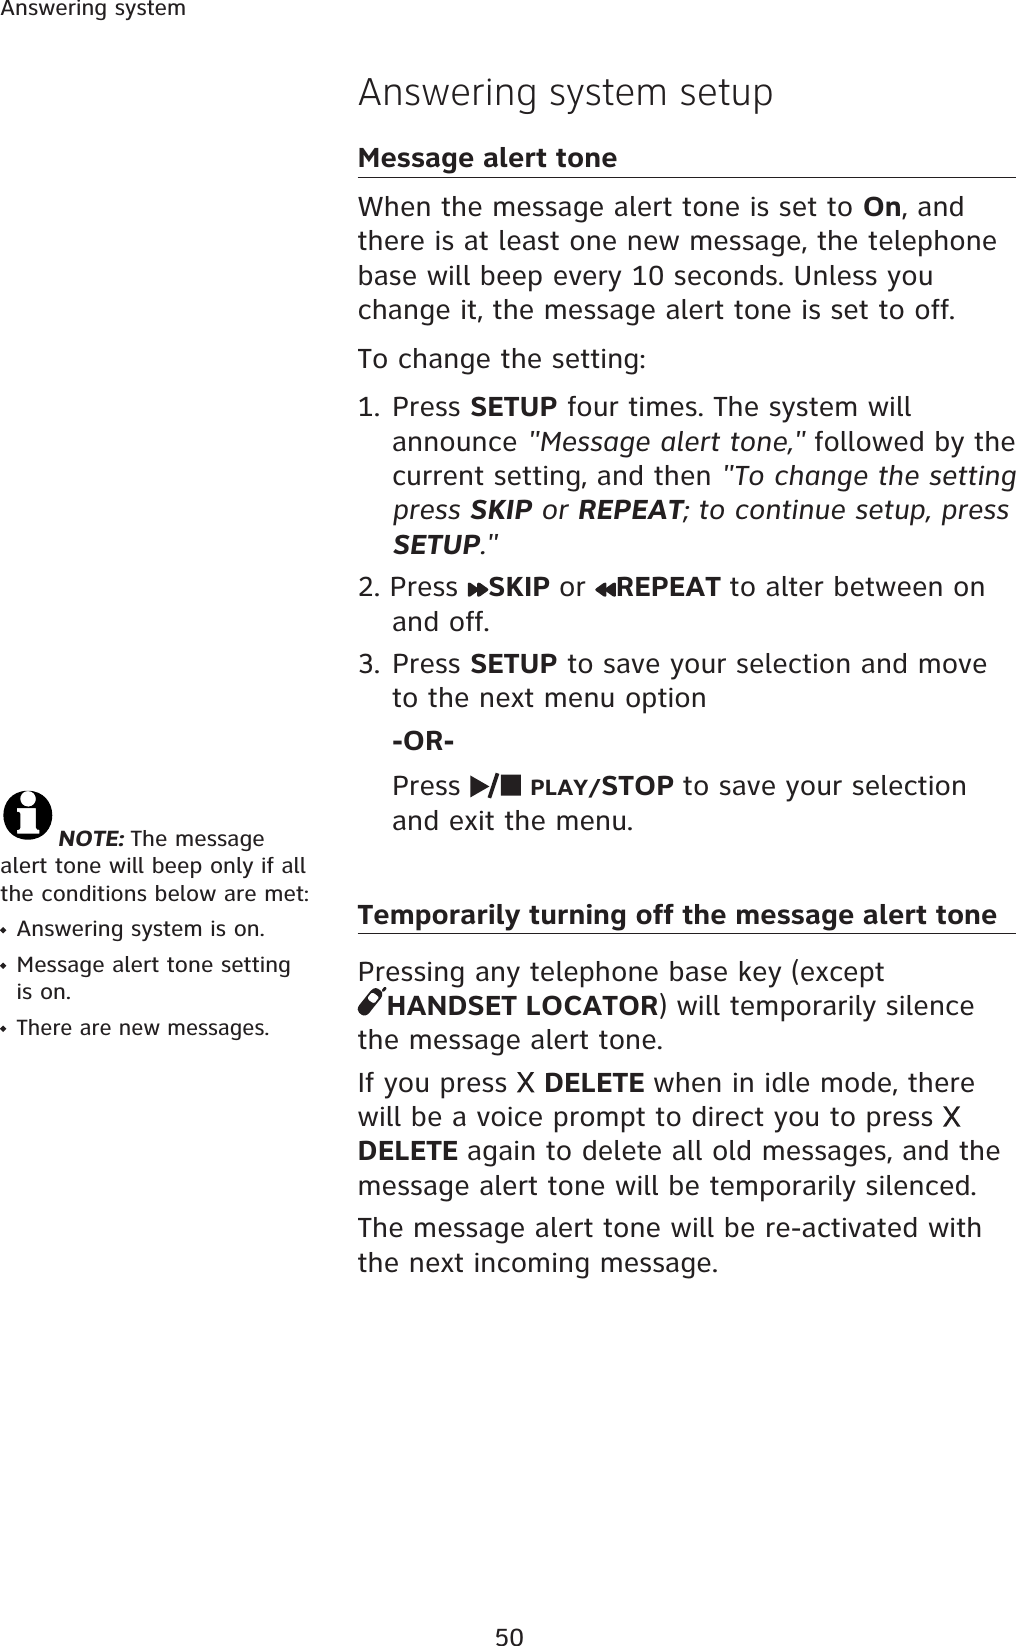 50Answering systemAnswering system setupMessage alert toneWhen the message alert tone is set to On, and there is at least one new message, the telephone base will beep every 10 seconds. Unless you change it, the message alert tone is set to off. To change the setting:1. Press SETUP four times. The system will announce &quot;Message alert tone,&quot; followed by the current setting, and then &quot;To change the setting press SKIP or REPEAT; to continue setup, press SETUP.&quot;2. Press  SKIP or REPEAT to alter between on and off.3. Press SETUP to save your selection and move to the next menu option -OR-Press PLAY/STOP to save your selection and exit the menu. Temporarily turning off the message alert tonePressing any telephone base key (except HANDSET LOCATOR) will temporarily silence the message alert tone. If you press  DELETE when in idle mode, there will be a voice prompt to direct you to press DELETE again to delete all old messages, and themessage alert tone will be temporarily silenced. The message alert tone will be re-activated with the next incoming message.NOTE: The message alert tone will beep only if all the conditions below are met:Answering system is on.Message alert tone setting is on.There are new messages.